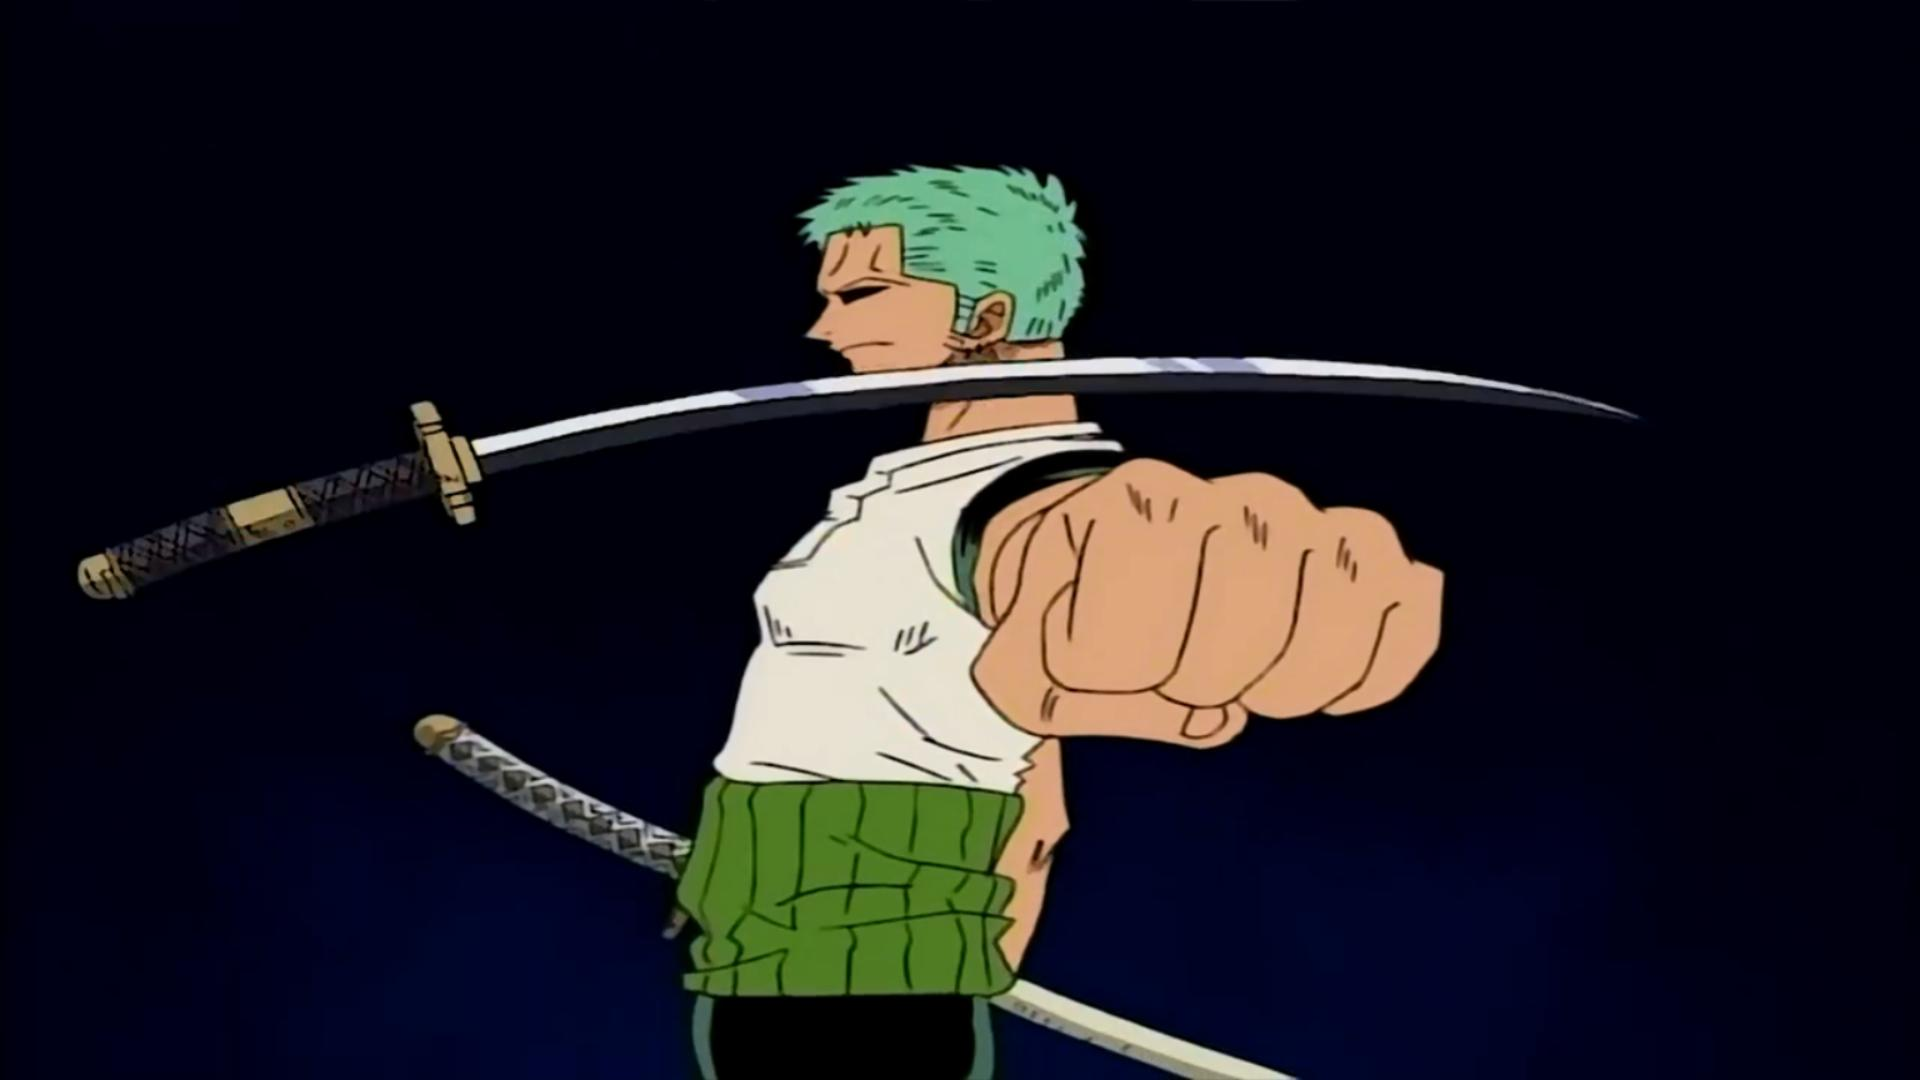 Zoro testing his luck against the curse of the sword